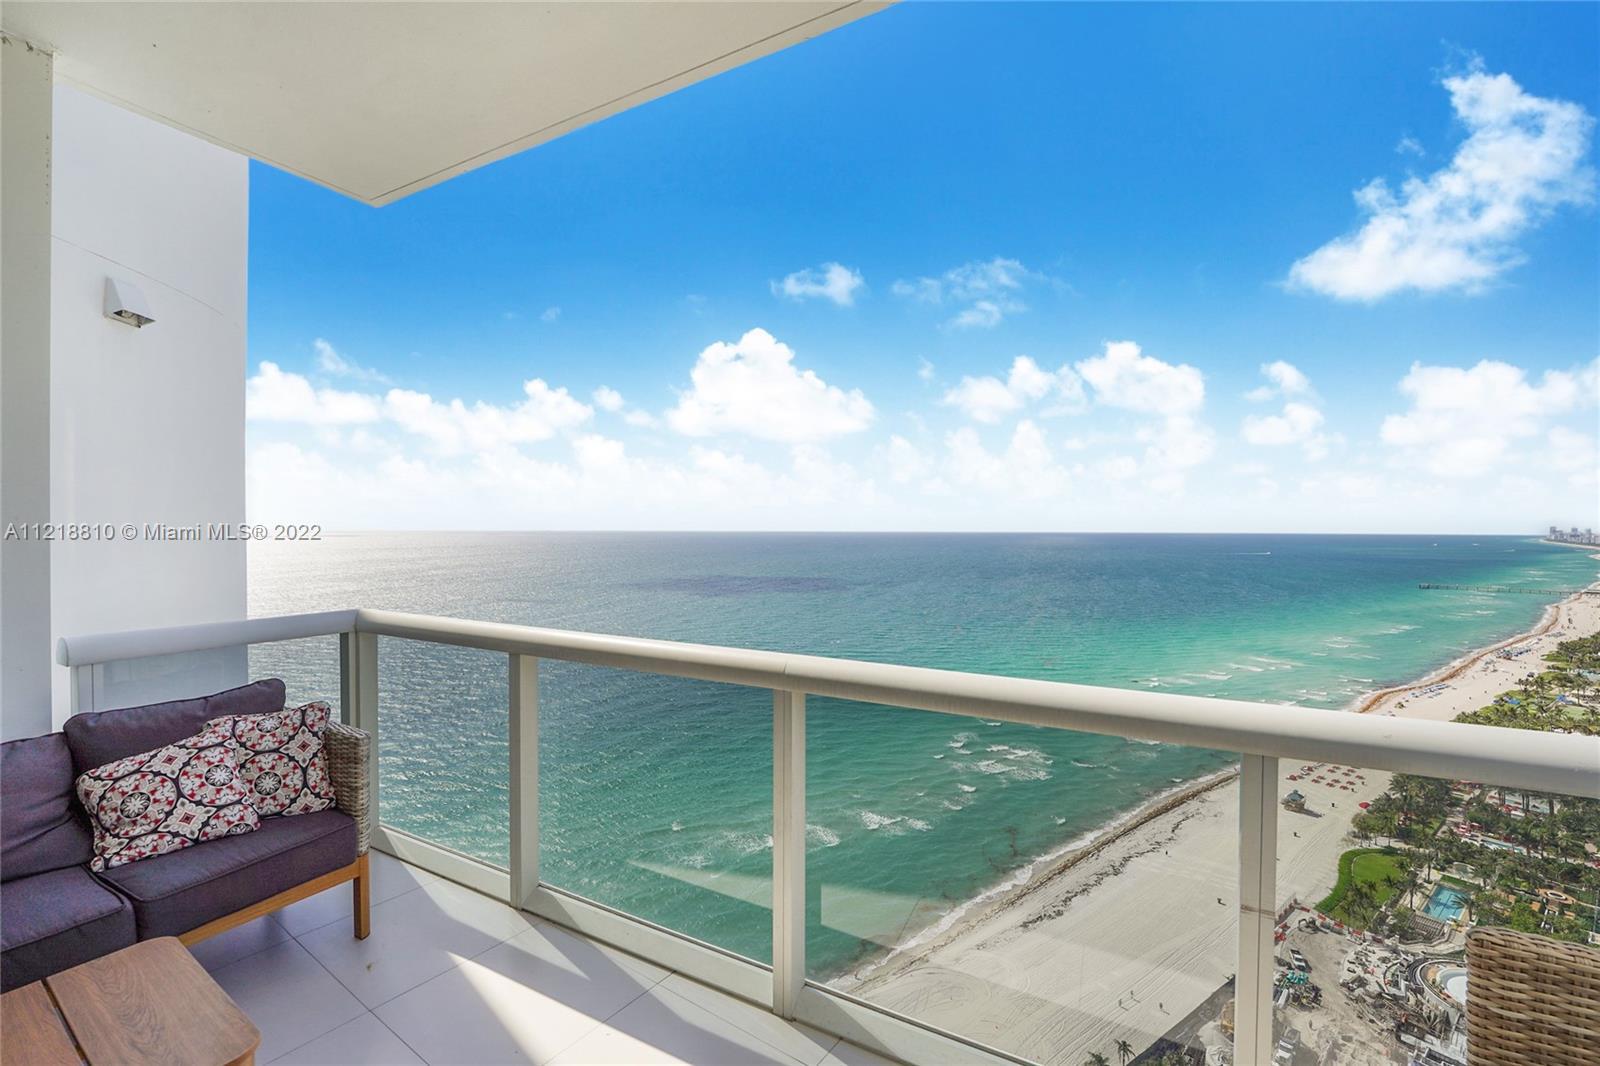 Trump Palace #4204 Oceanfront Condo 5-star Amenities flow- through unit, elevator opens to your priv